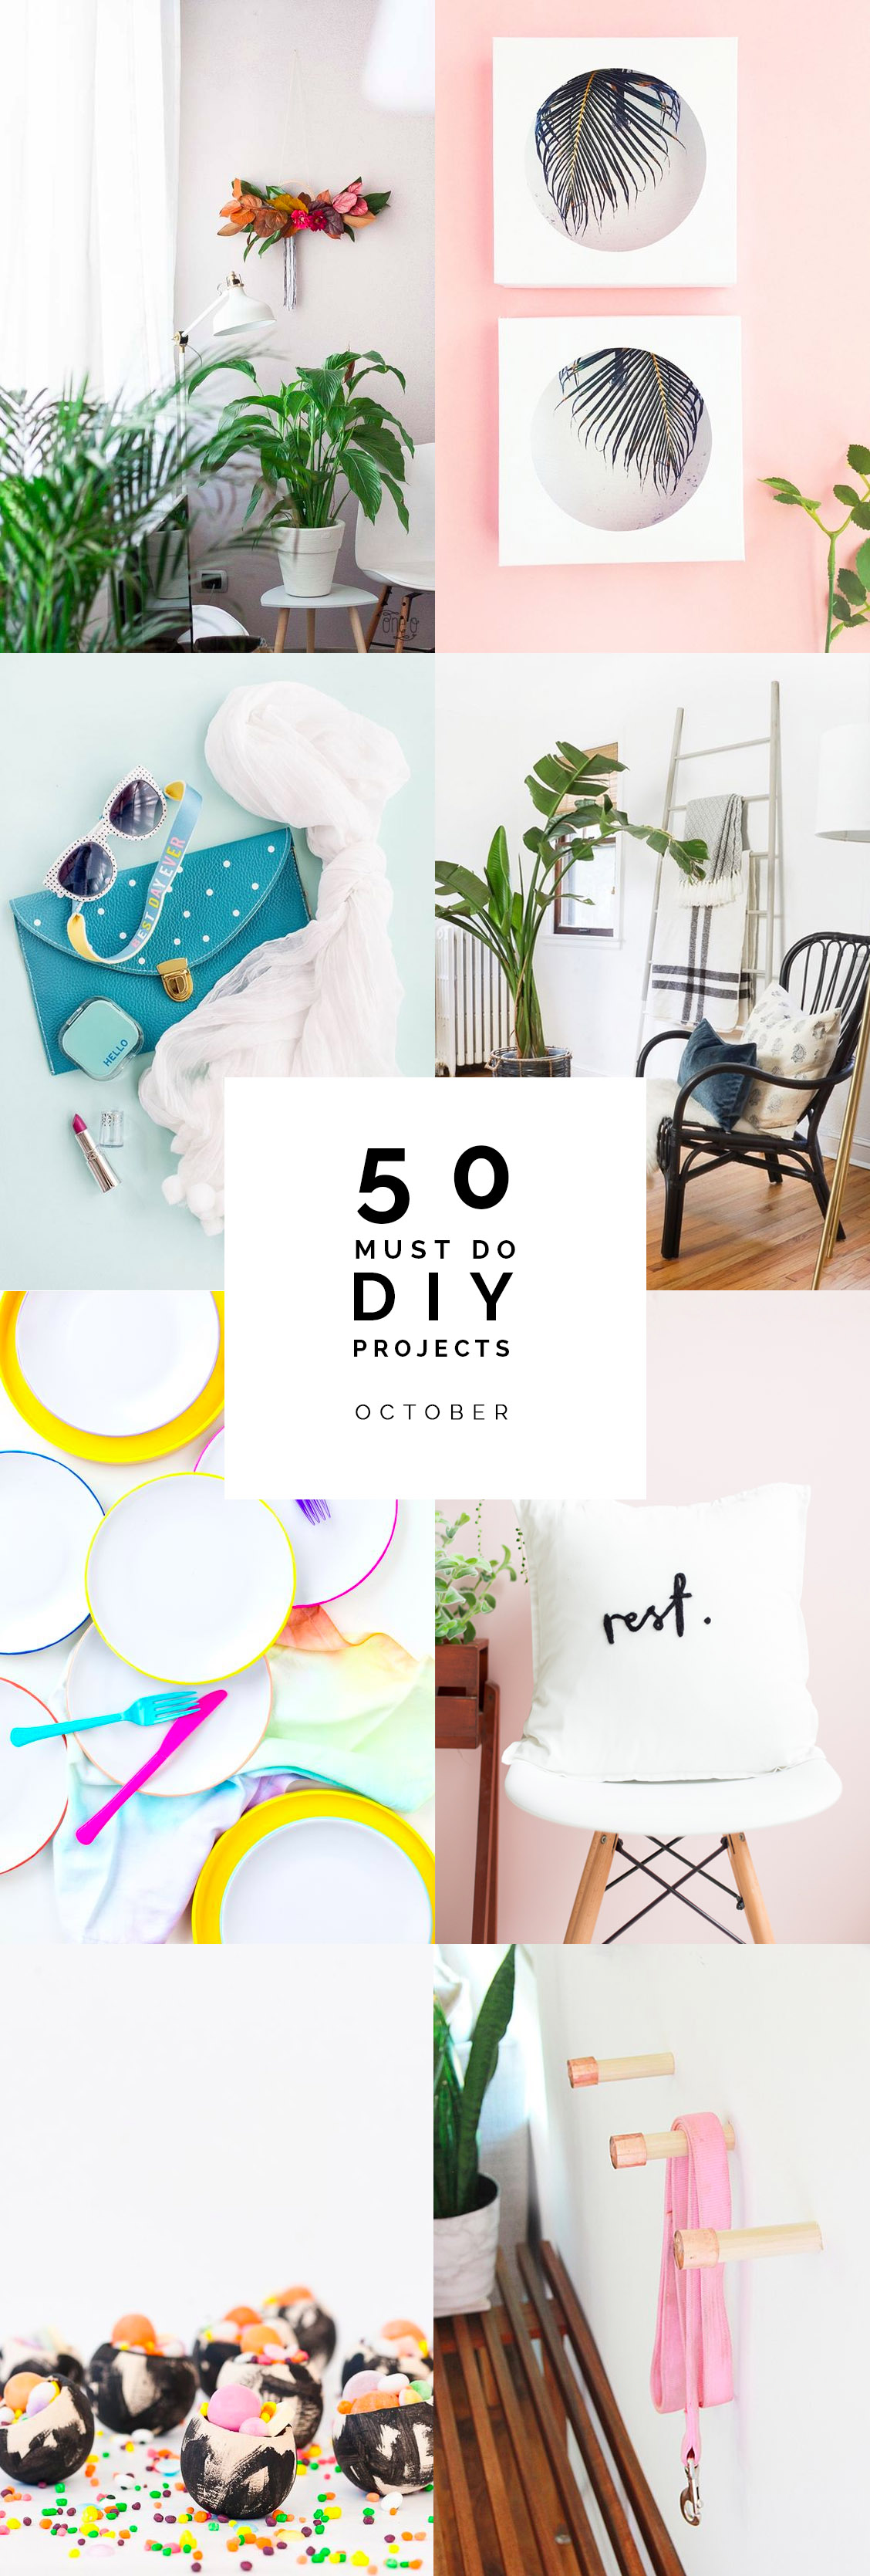 50-must-do-diy-projects-october